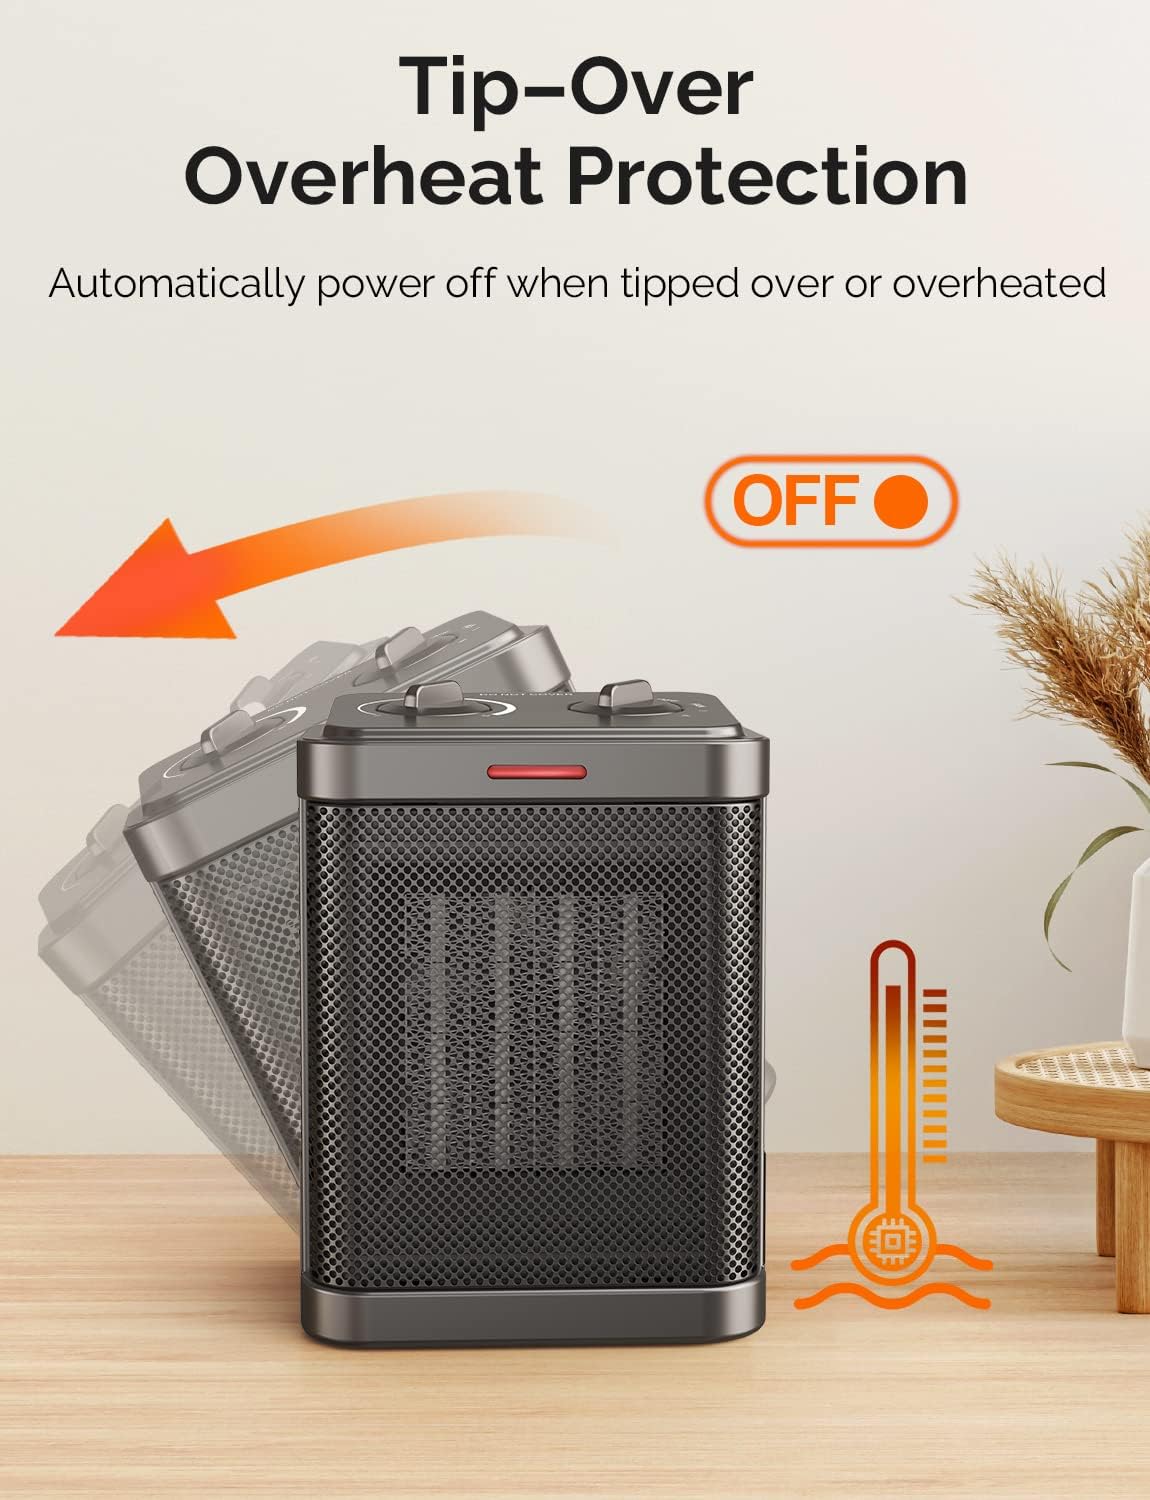 1500W/900W Space Heaters for Indoor Ues, Electric Portable Heater with Thermostat, 3 Modes, Multiple Protection, Small Heater Safety for Home Office Quiet - 1500W/900W Space Heater Review